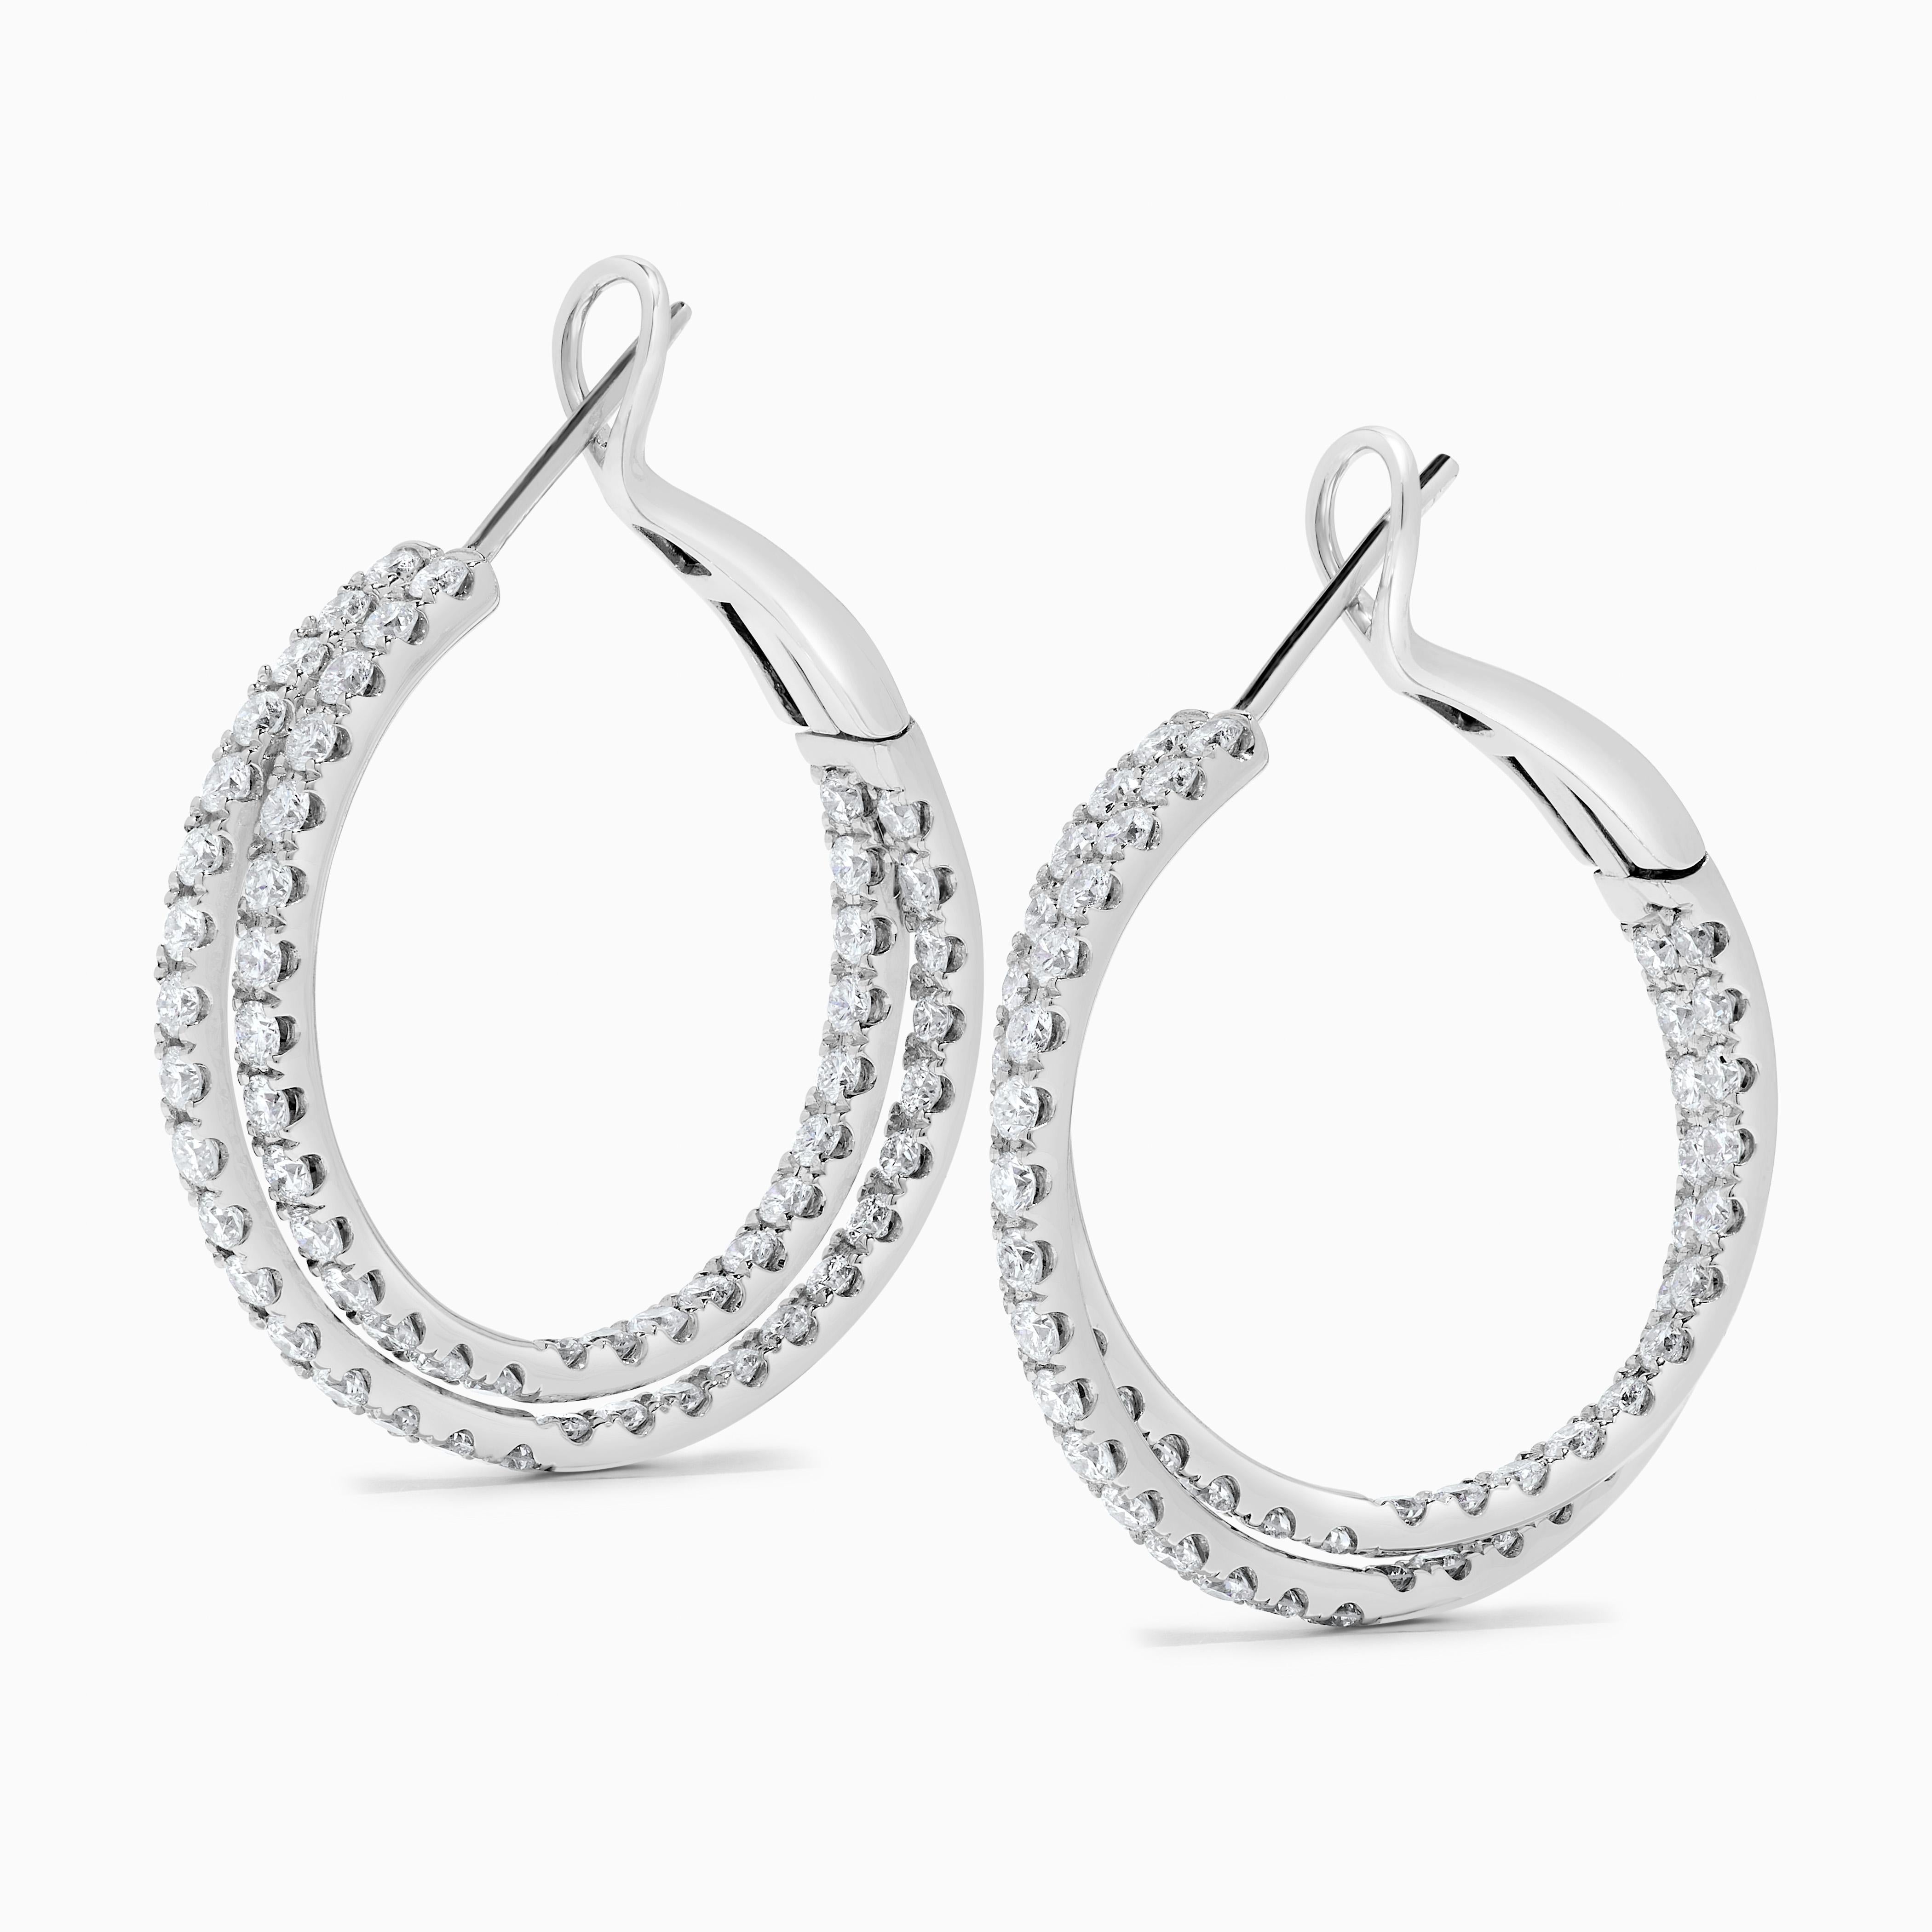 RareGemWorld's classic diamond earrings. Mounted in a beautiful 18K White Gold setting with natural round cut white diamonds. These earrings are guaranteed to impress and enhance your personal collection!

Total Weight: 2.62cts

Width: 32.6